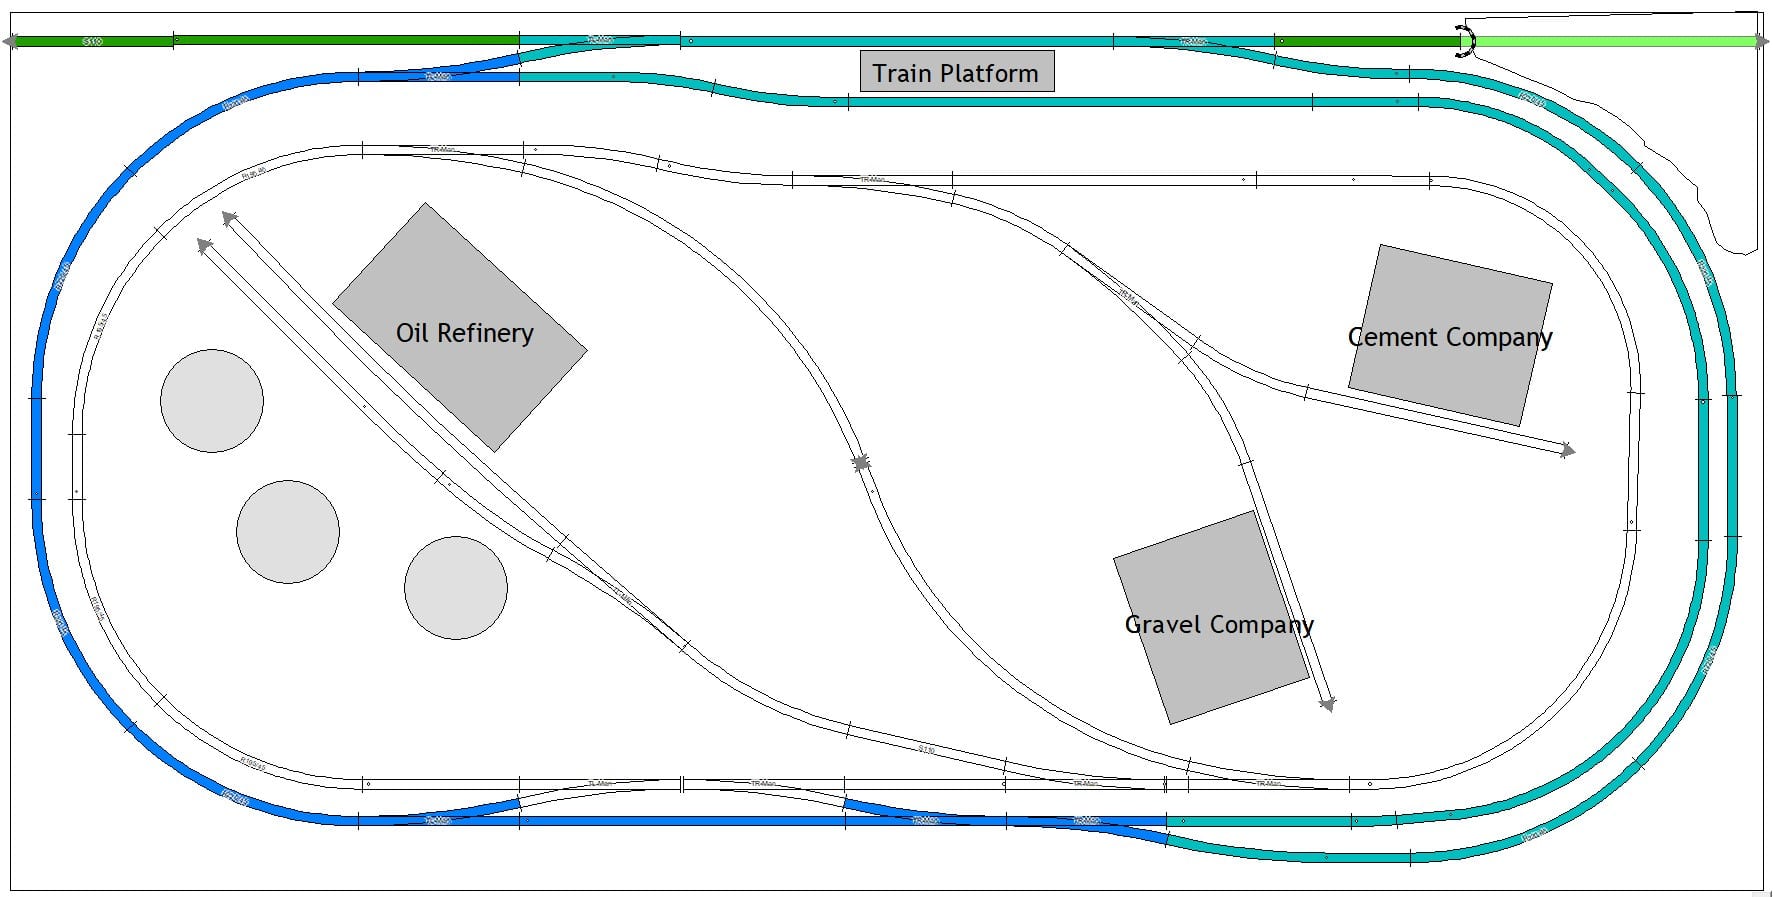 Track Plans for N Scale James Model Trains